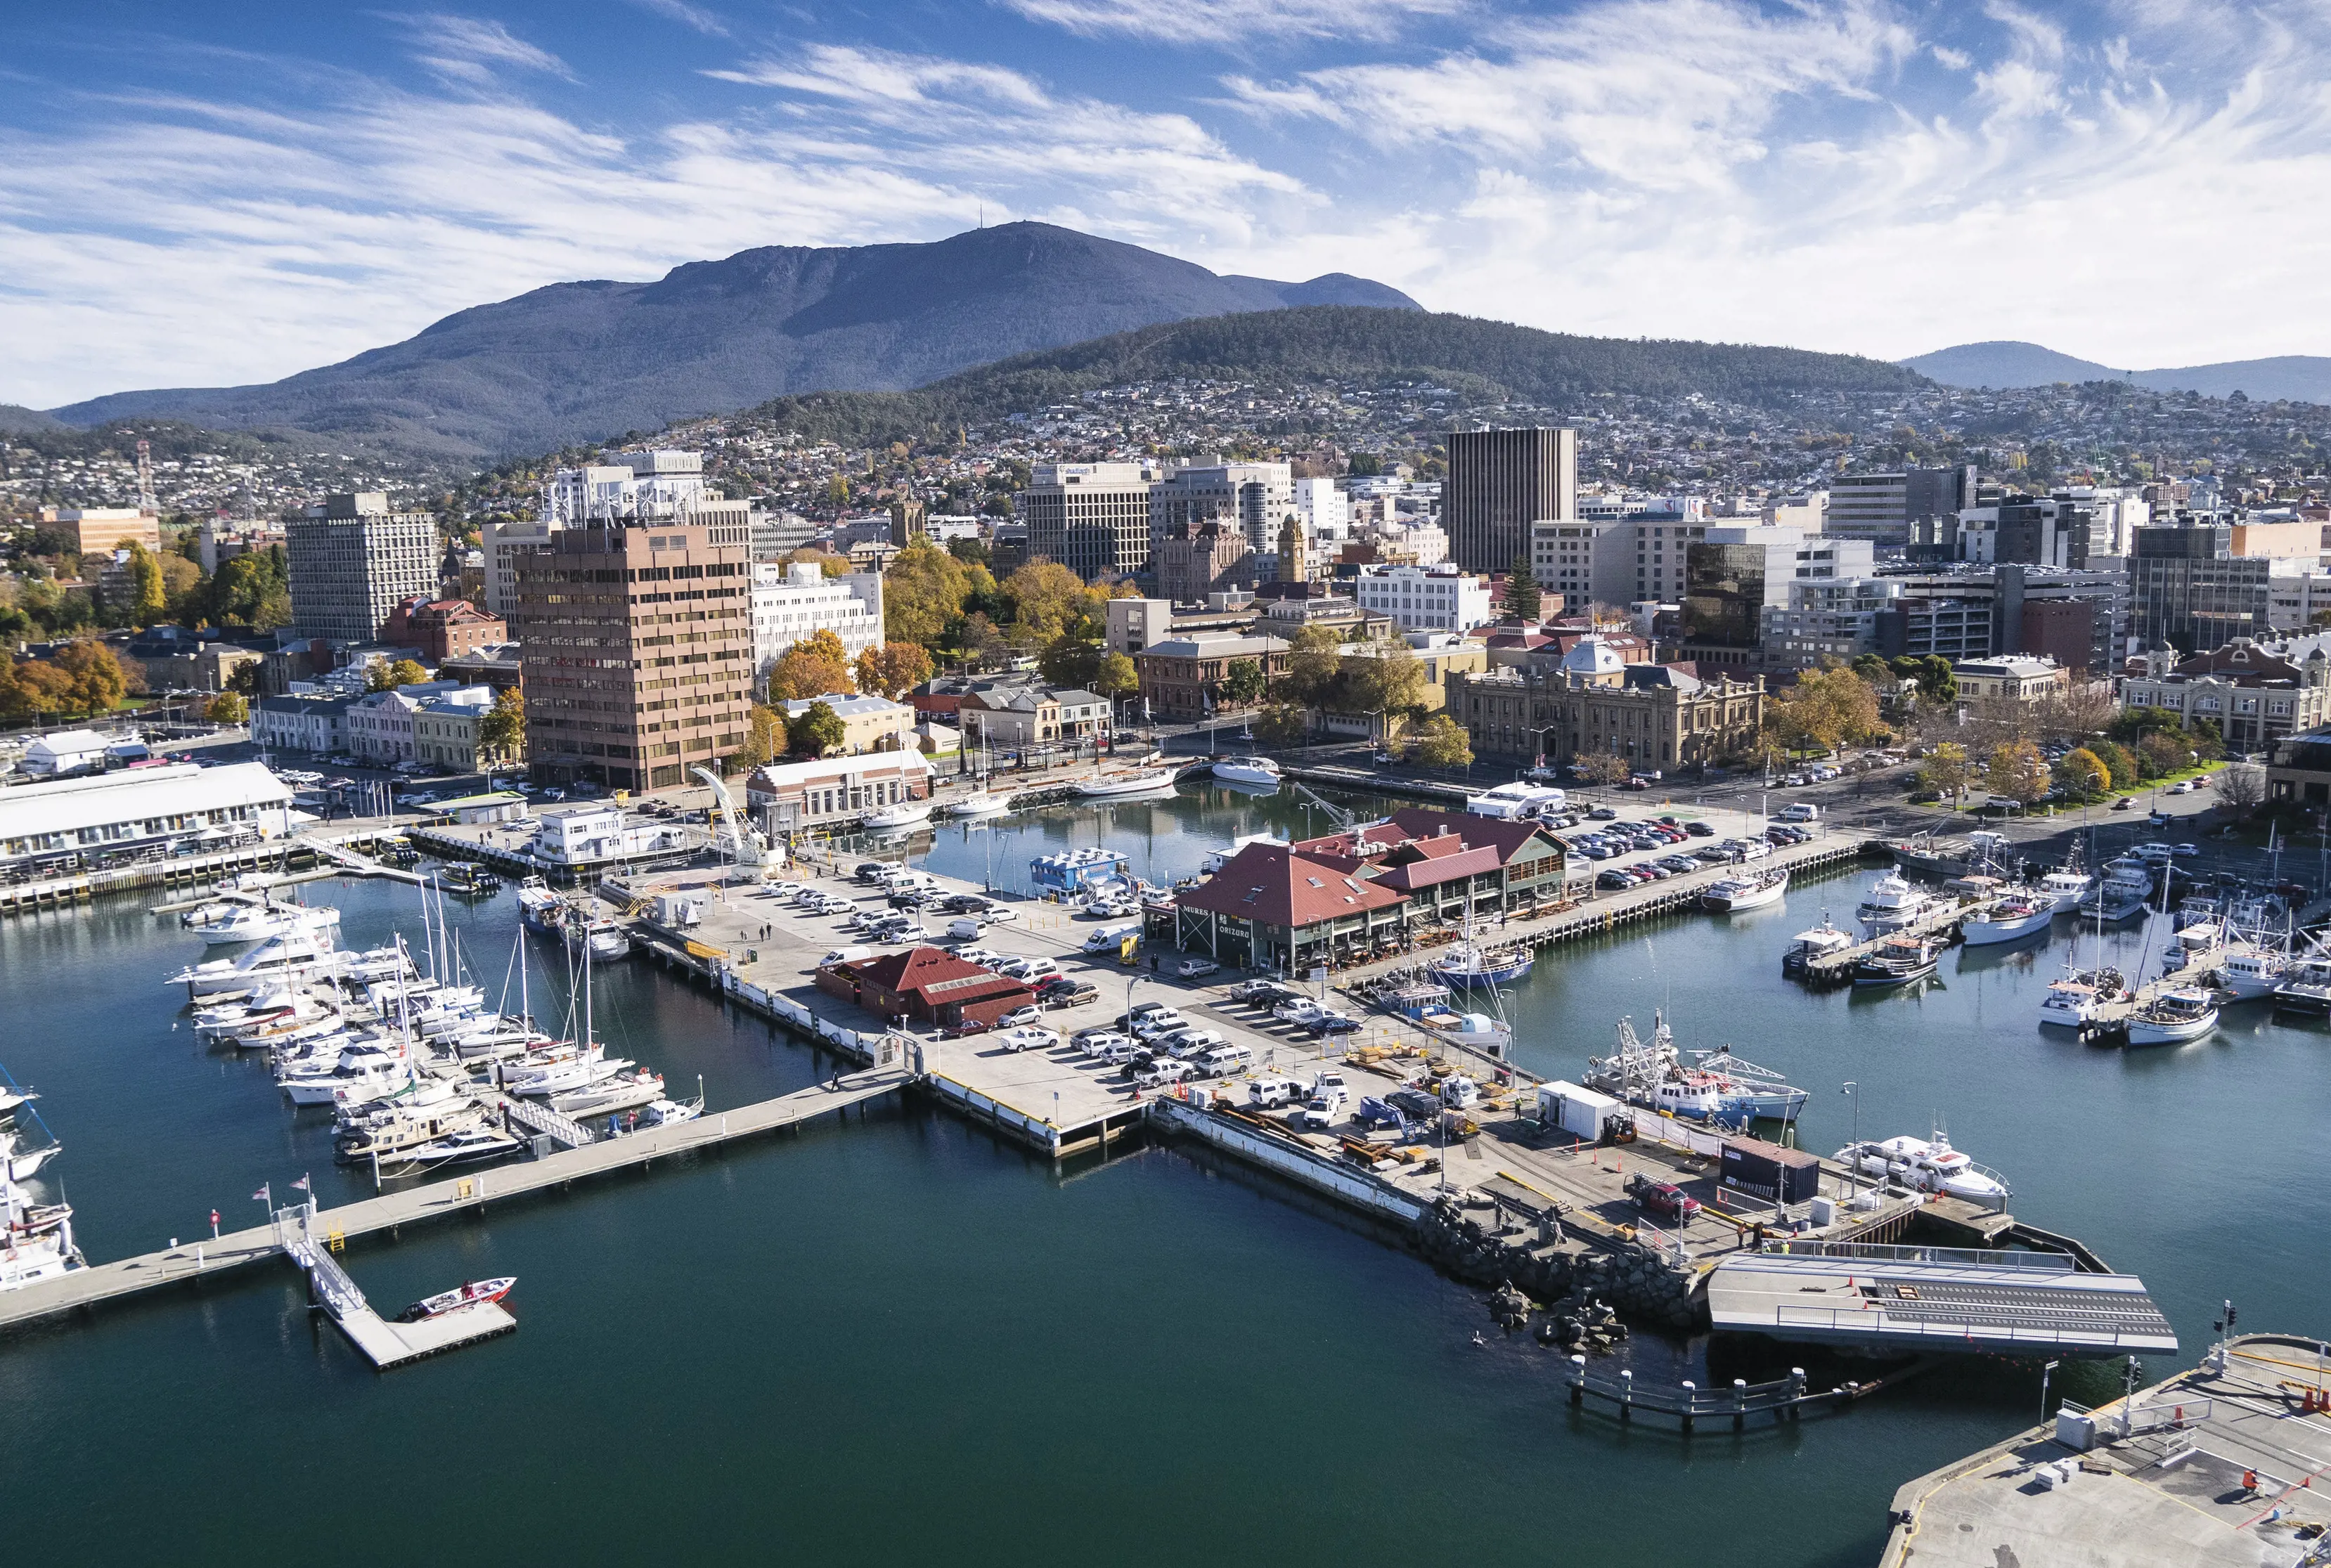 Aerial view of Hobart's marina with kunanyi/Mt Wellington towering in the background.